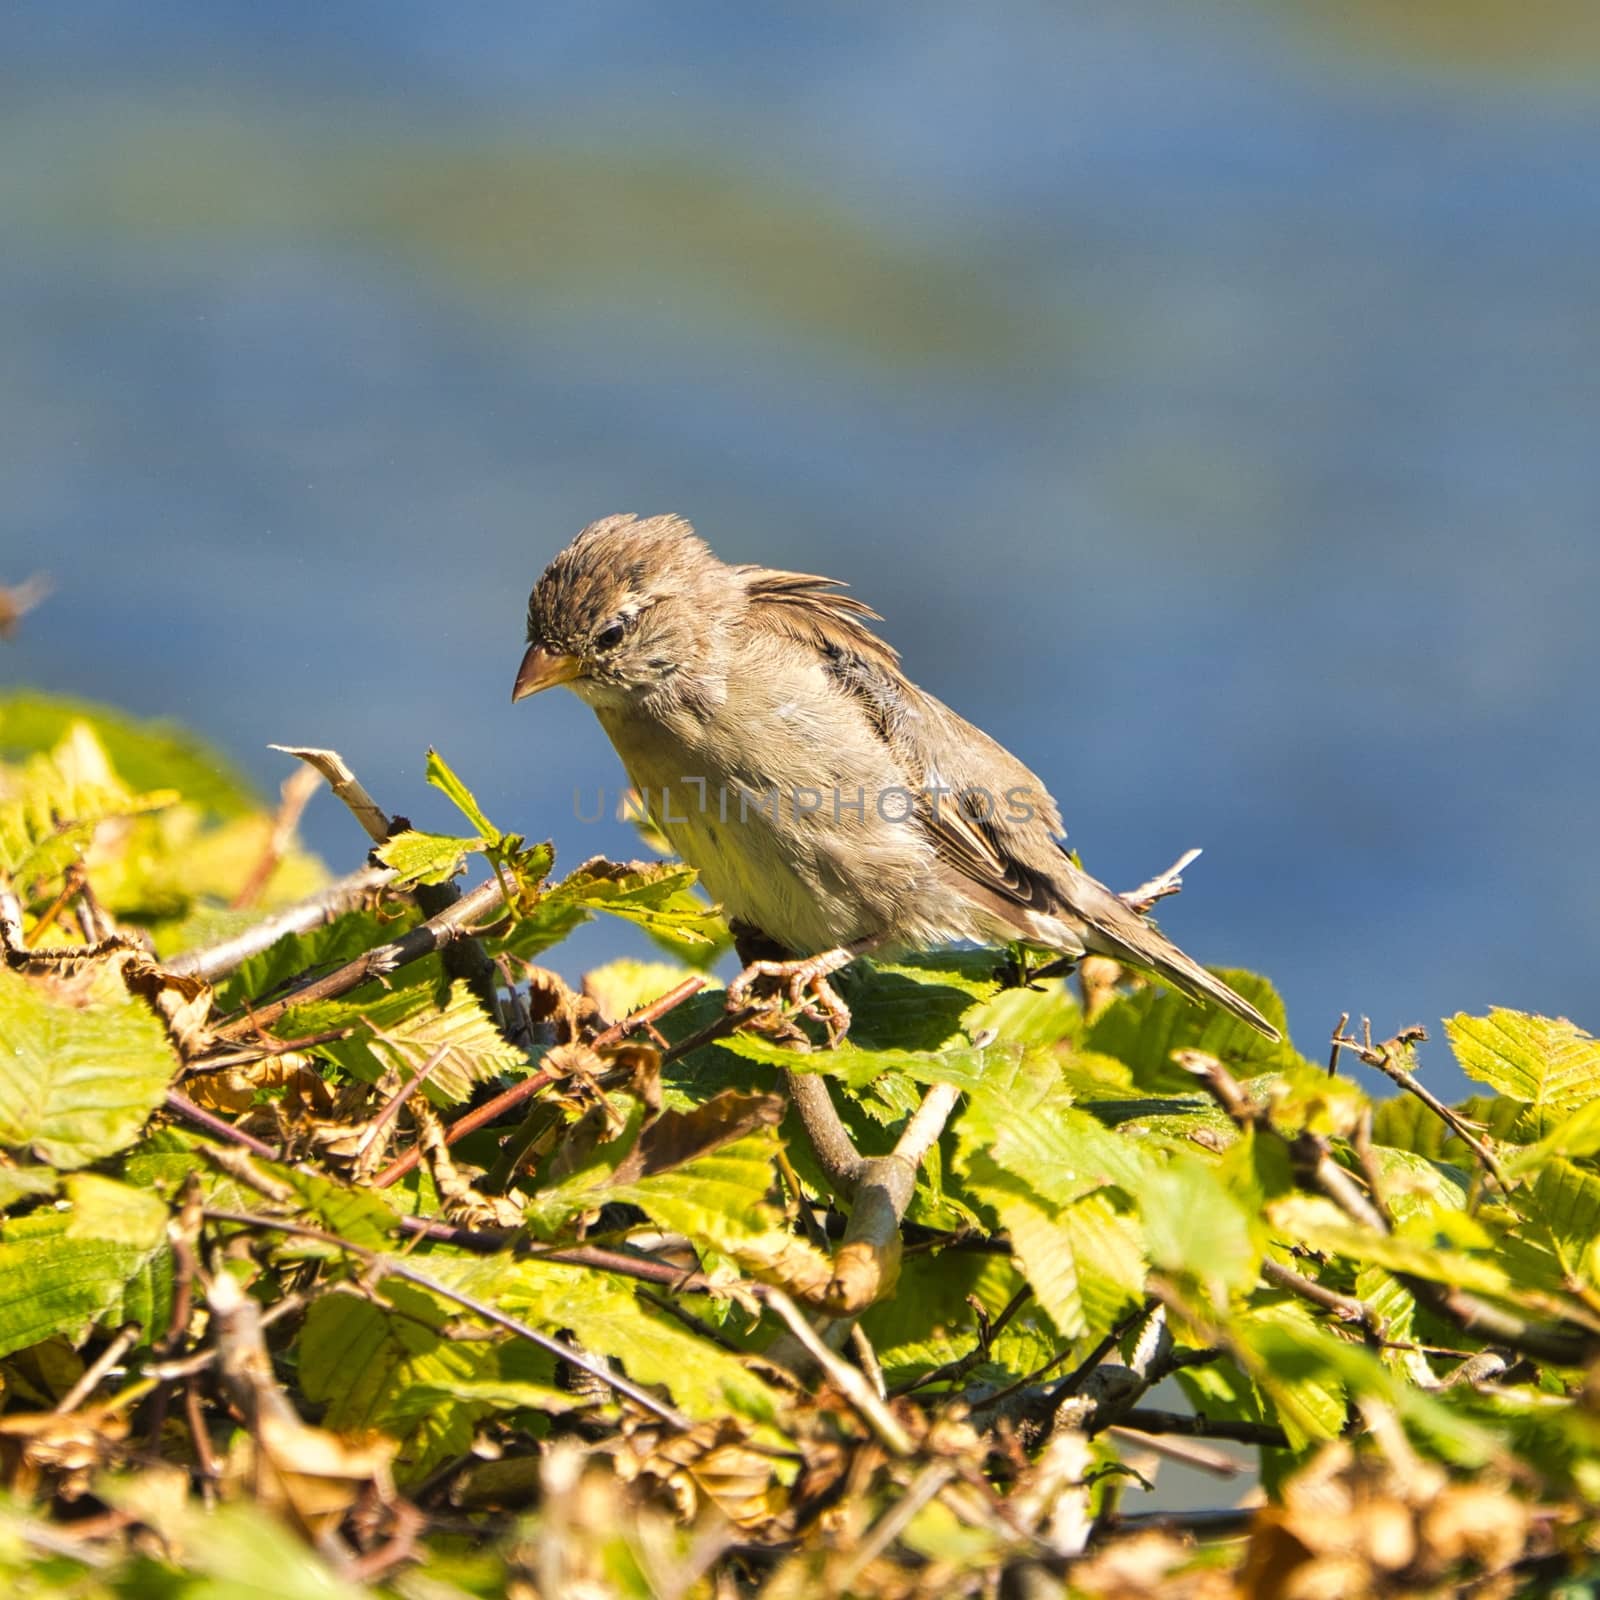 single old sparrow - windy pkace in front of water